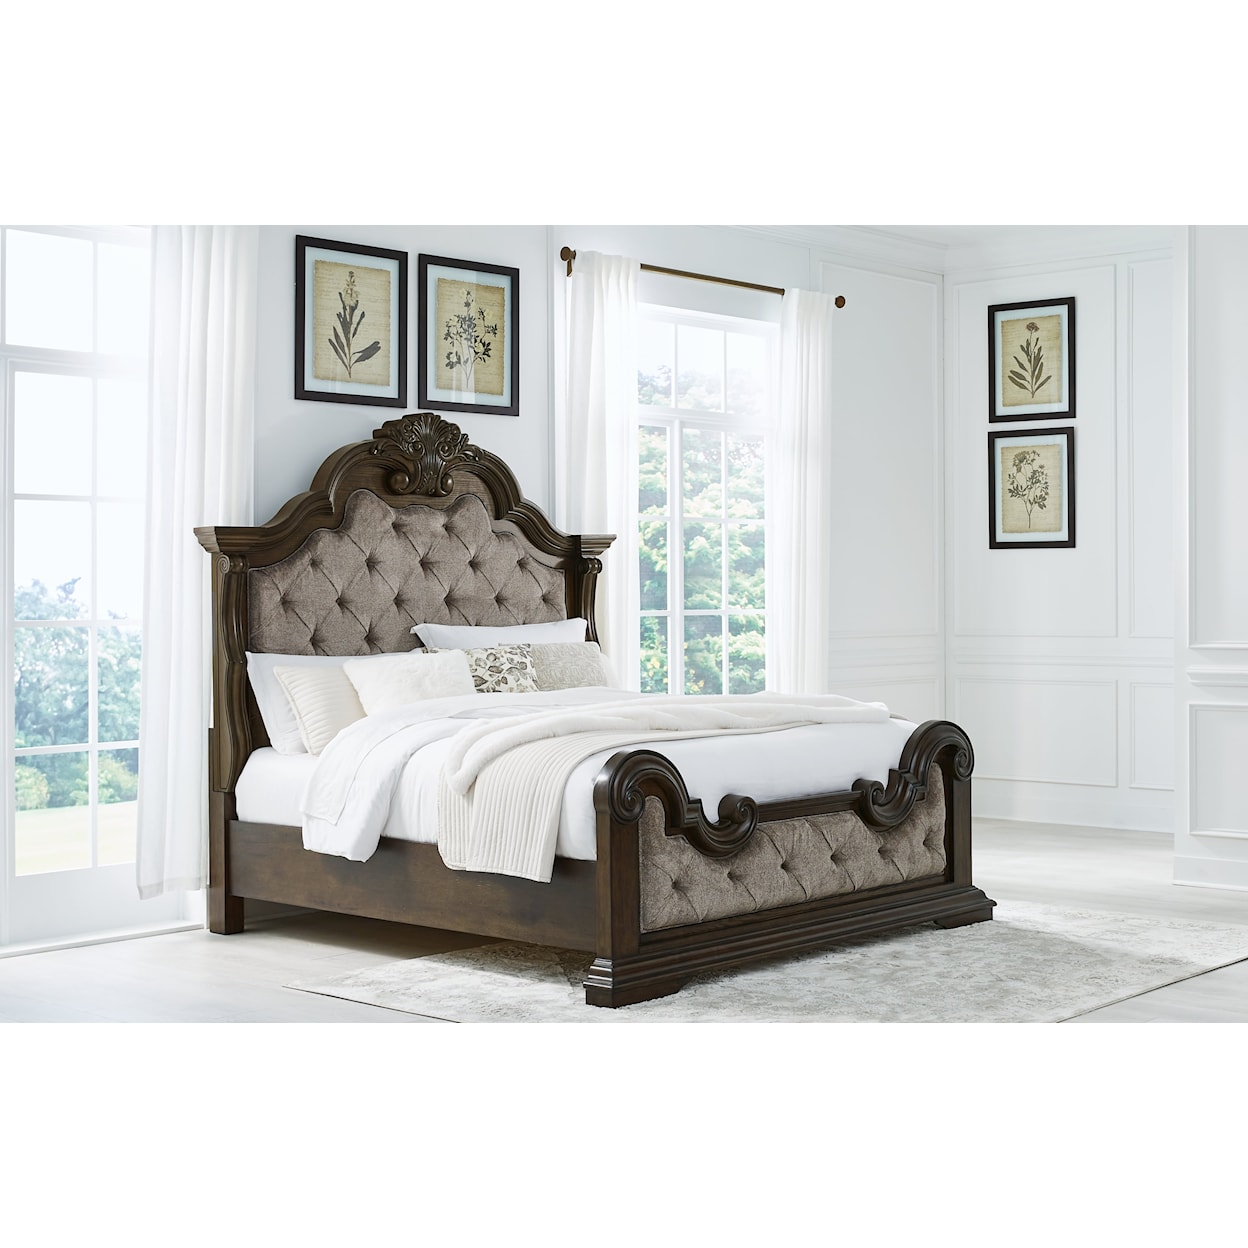 Signature Design Maylee California King Upholstered Bed